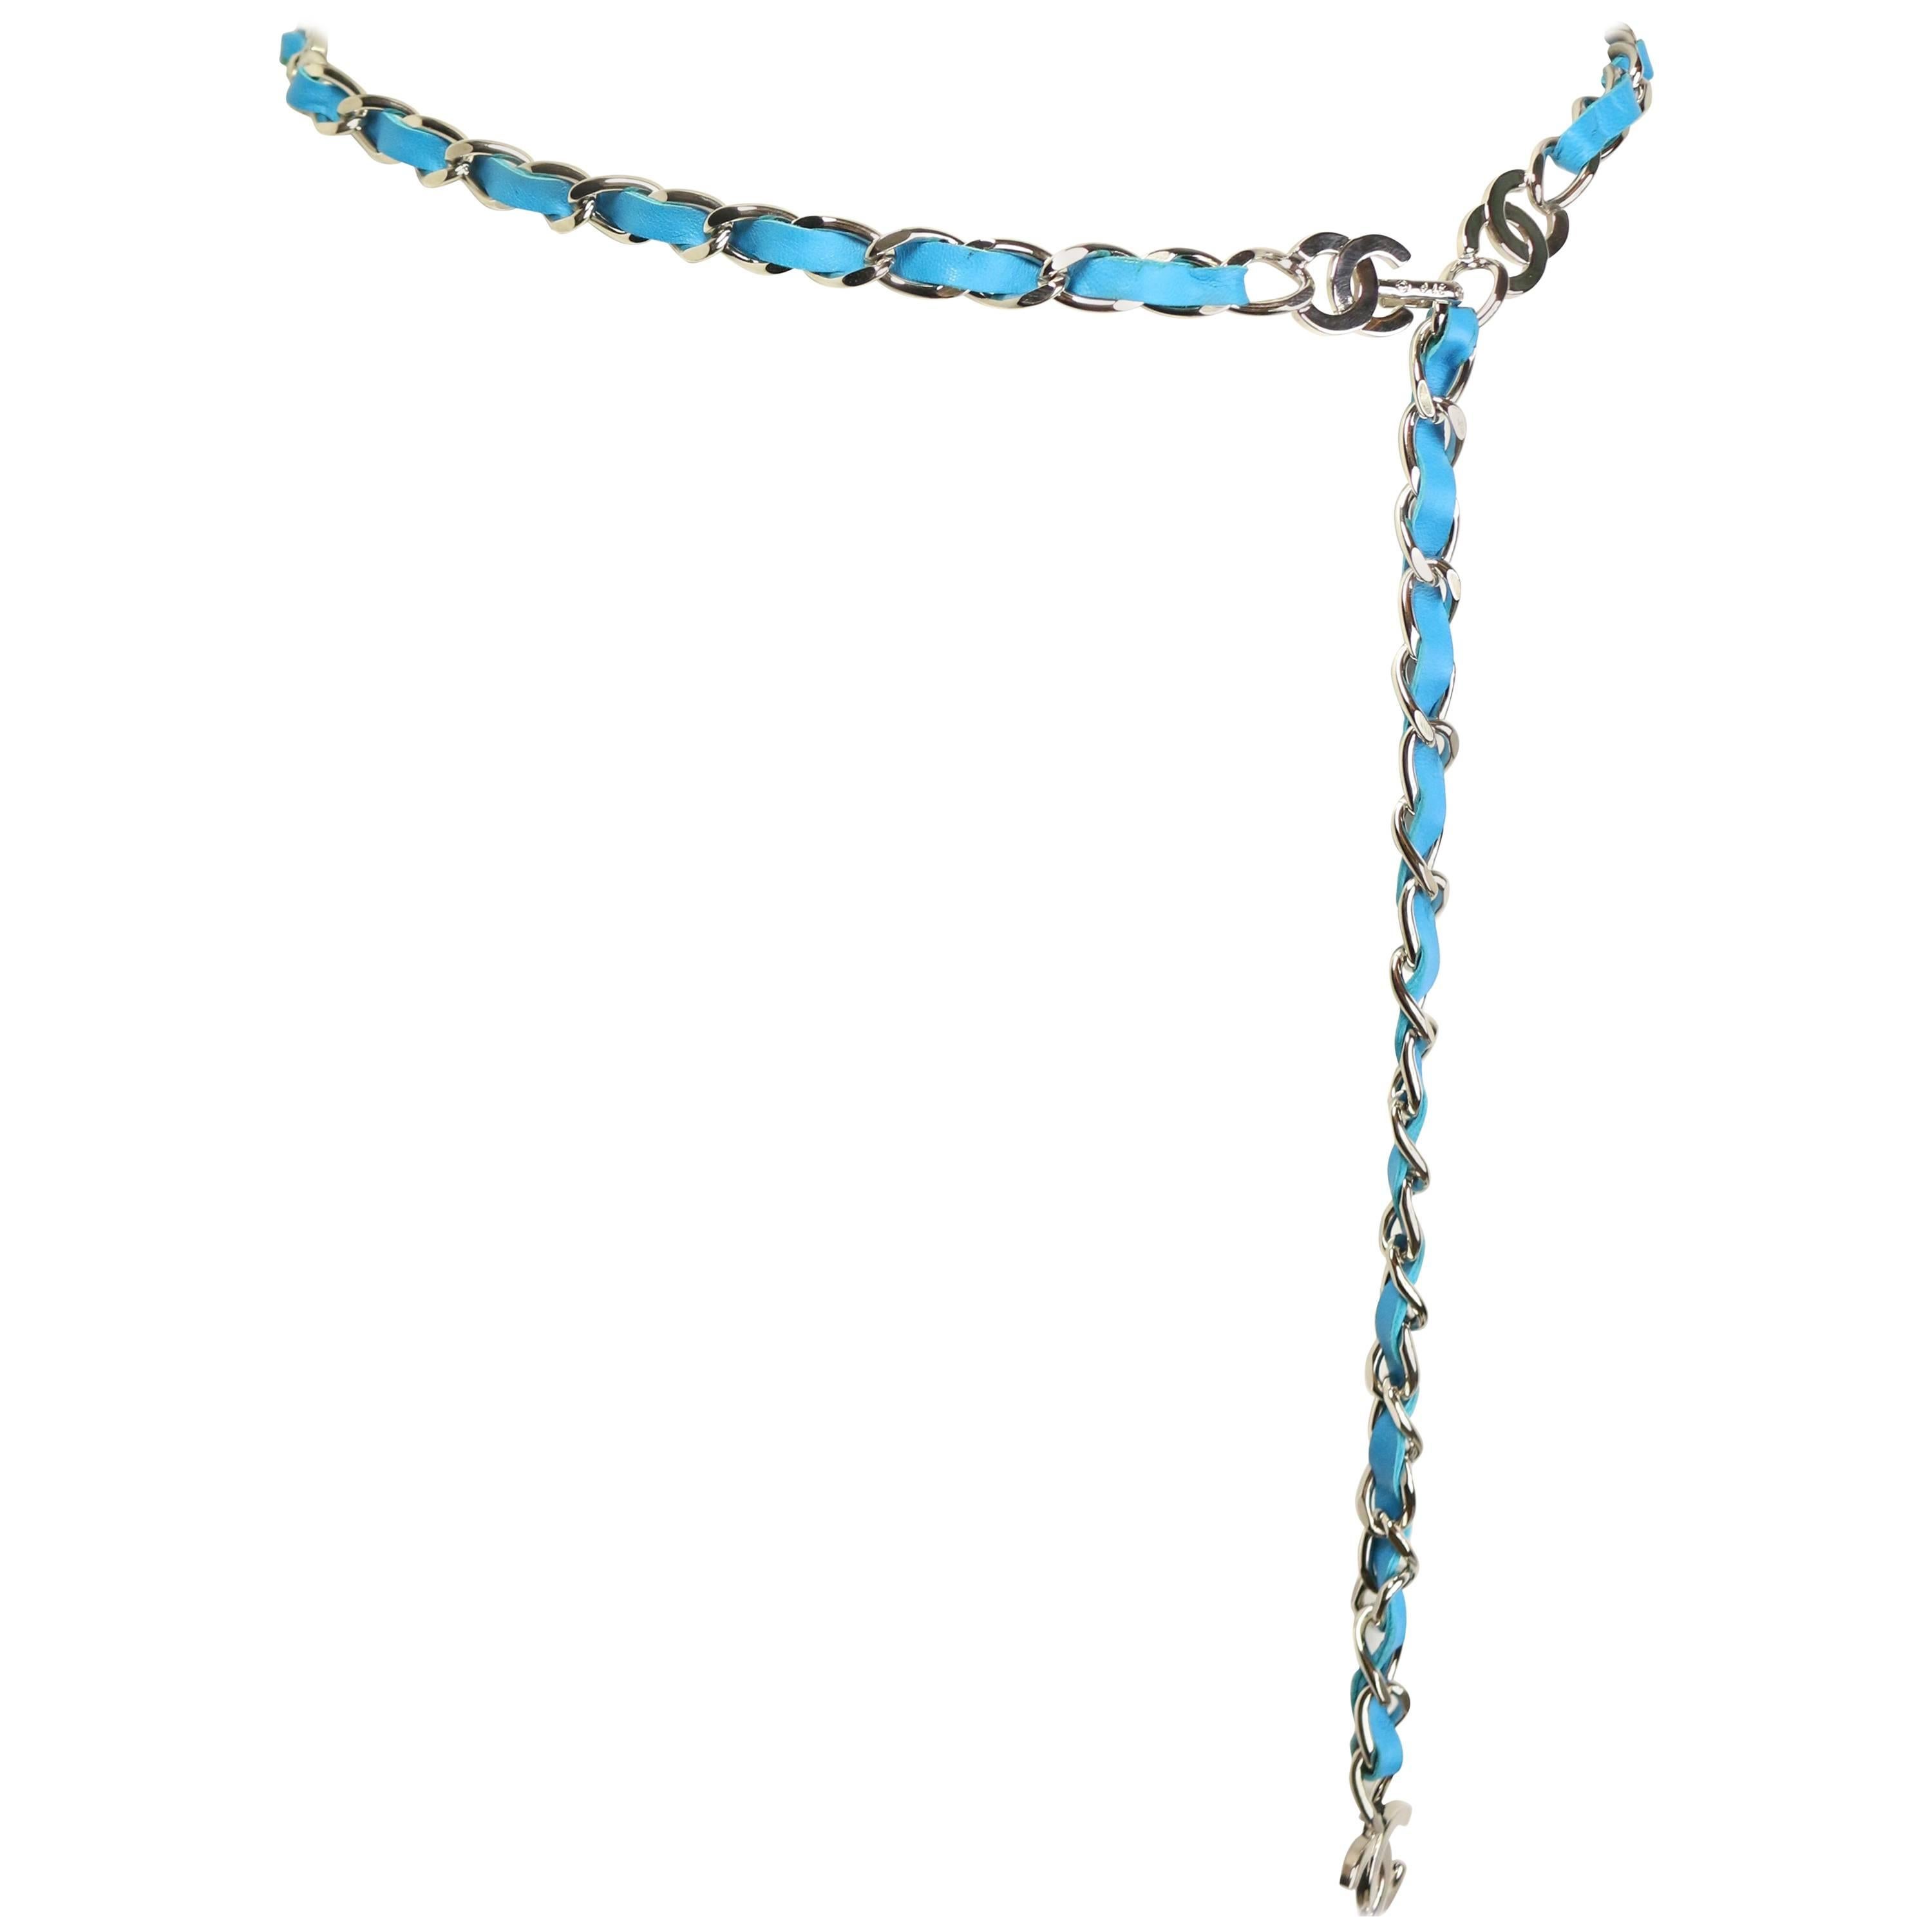 Chanel Turquoise Lambskin Leather "CC" Silver Chain Belt